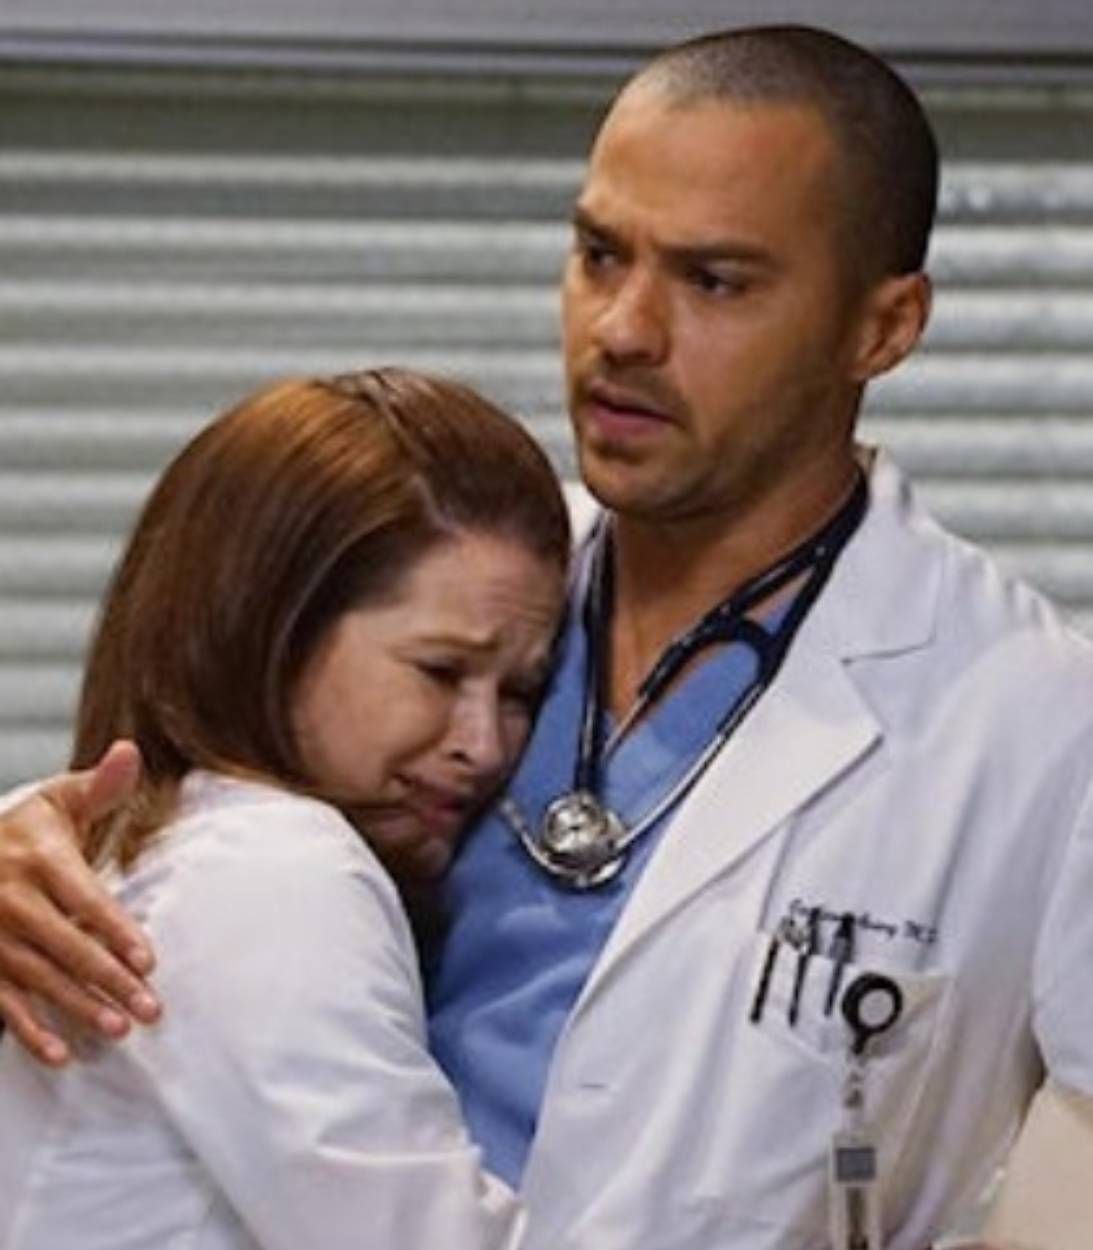 April and Jackson in Greys Anatomy pic vertical